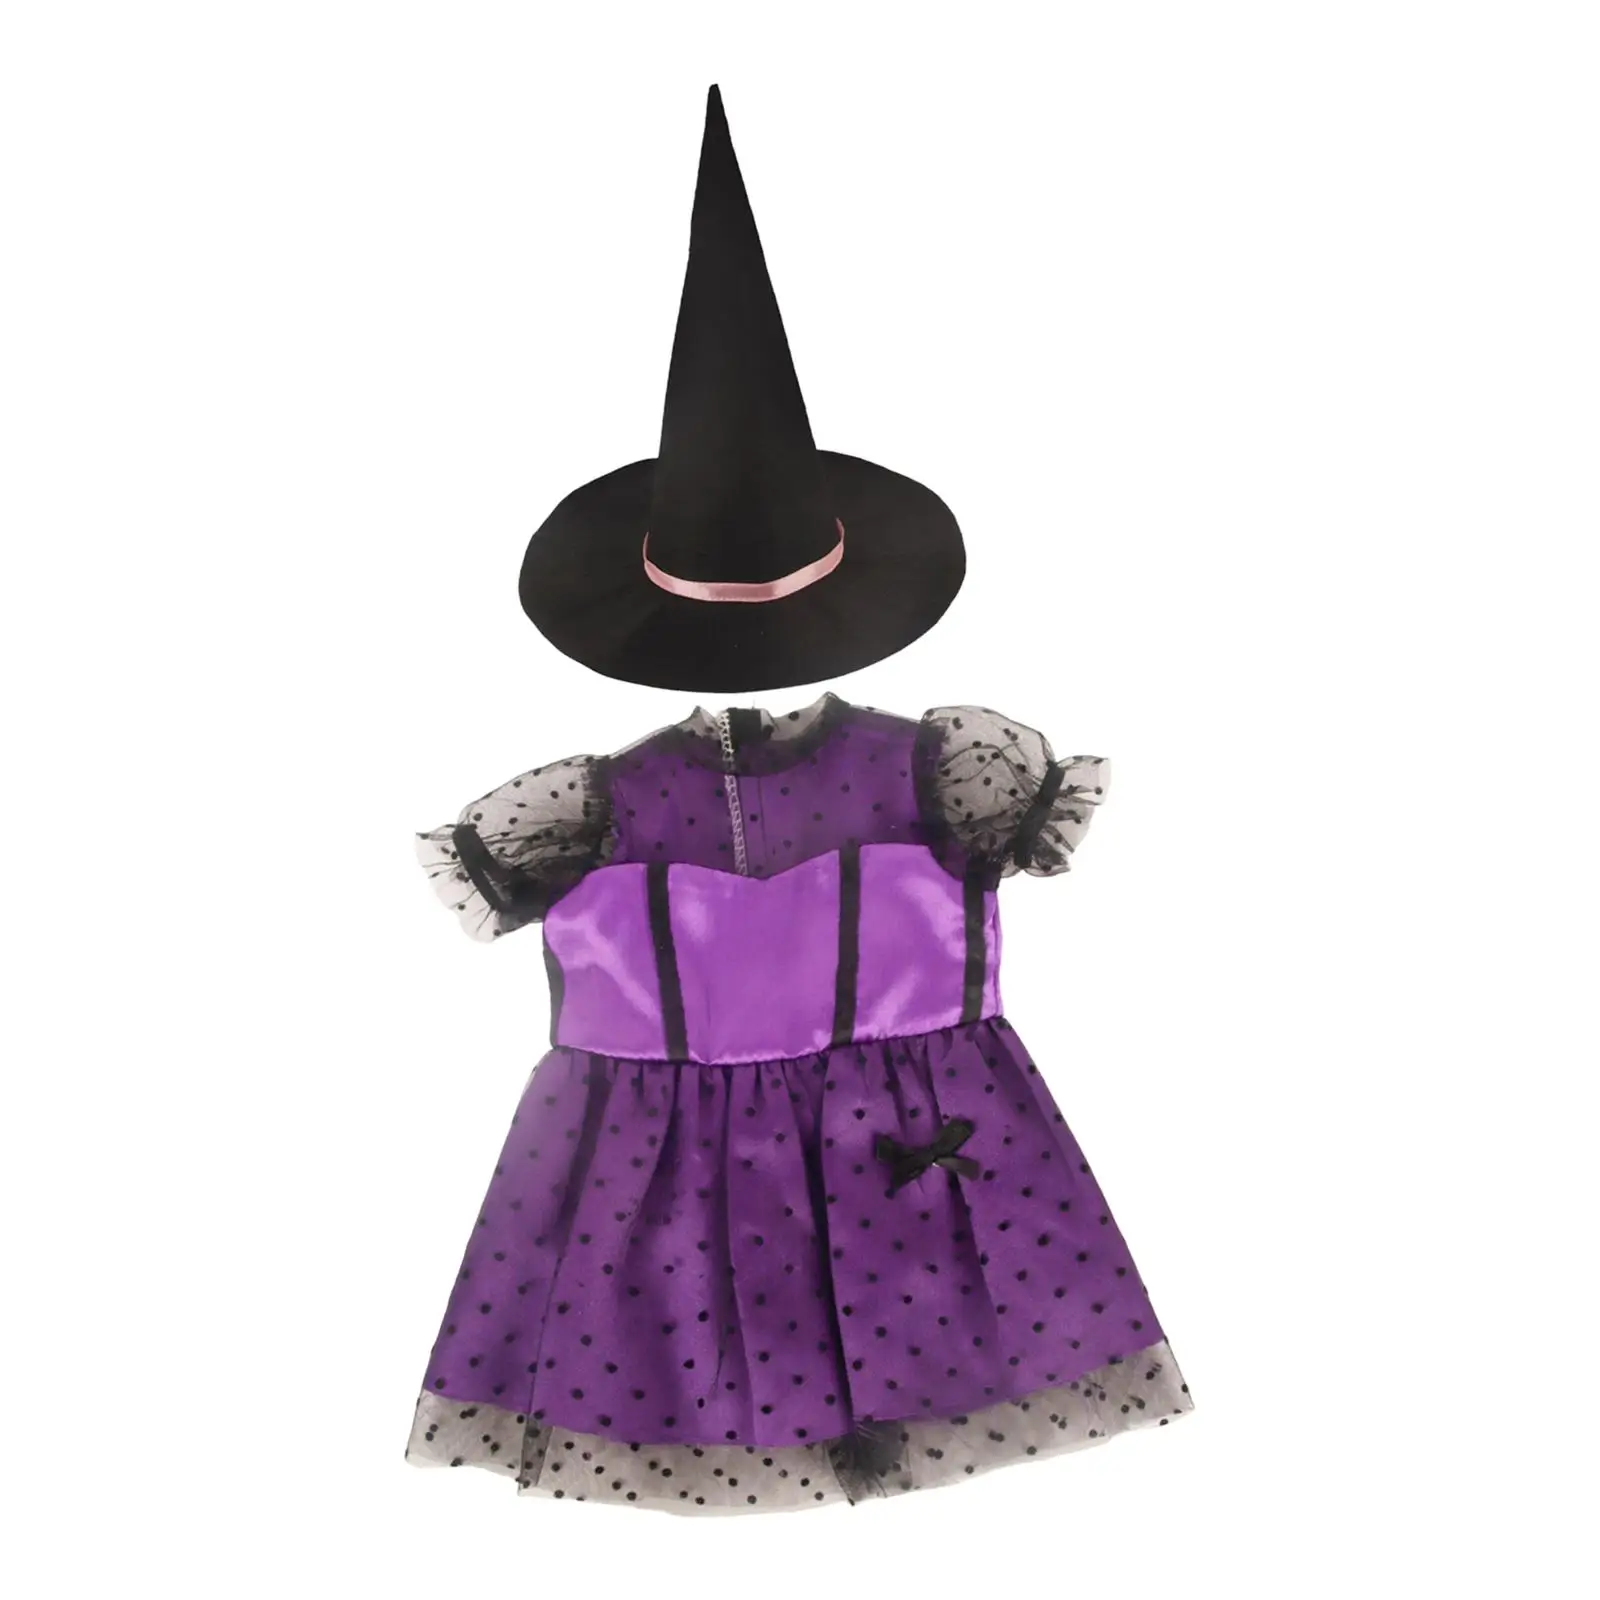 18`` Doll Dress Outfit Party Dress for Activity Cosplay Role Playing